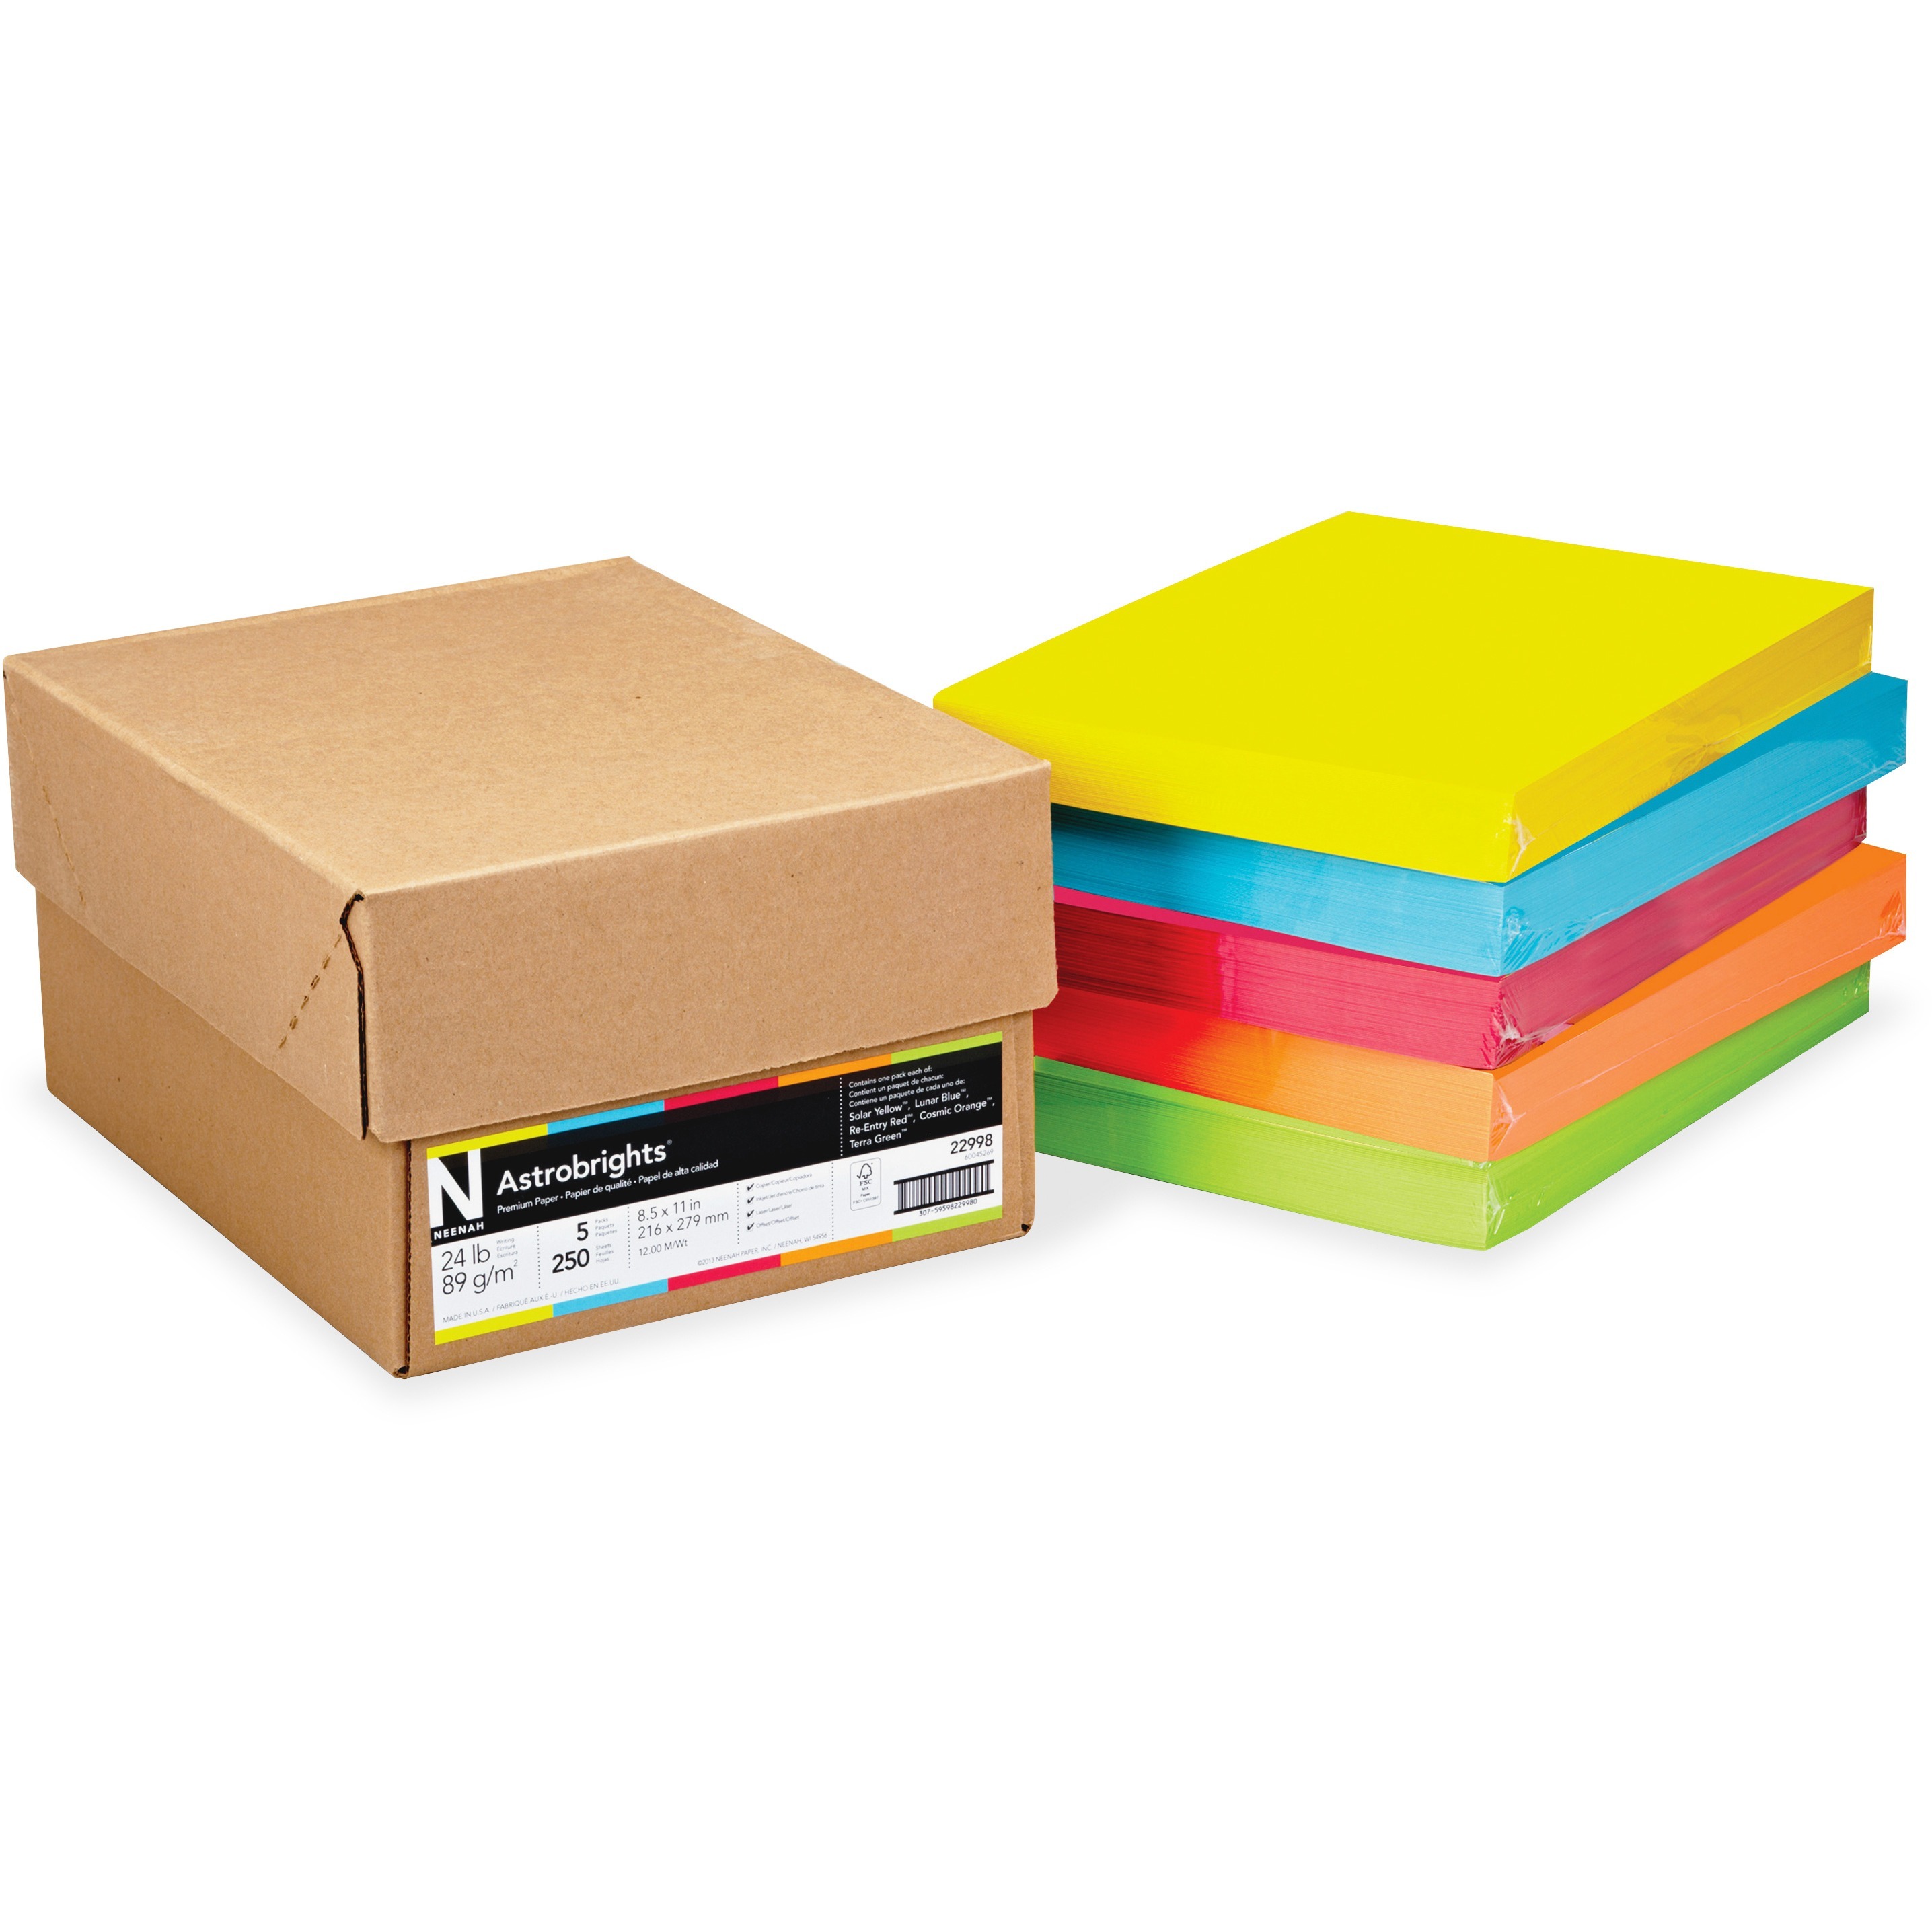  Astrobrights Colored Cardstock, 8.5” x 11”, 65 lb